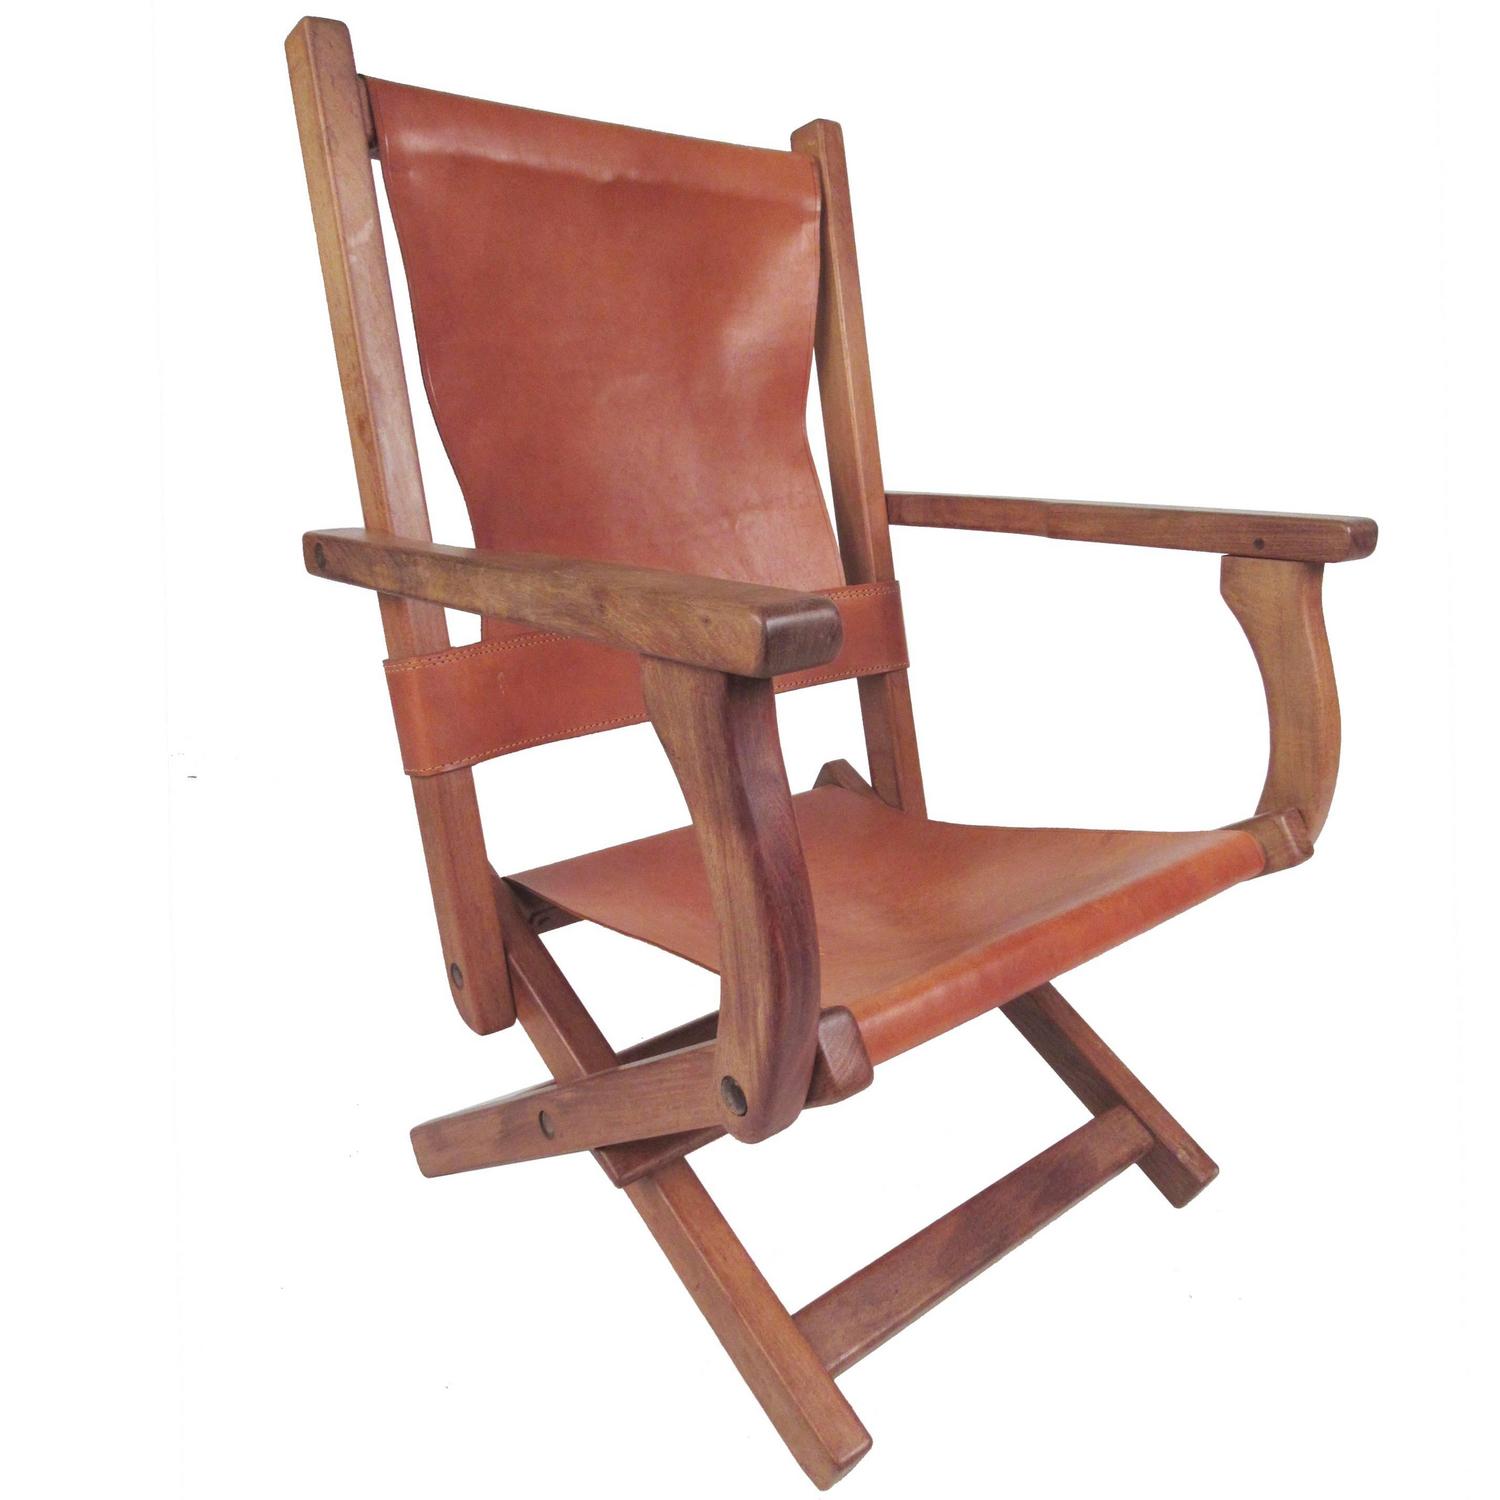 Contemporary Modern Folding Leather Armchair For Sale at ...